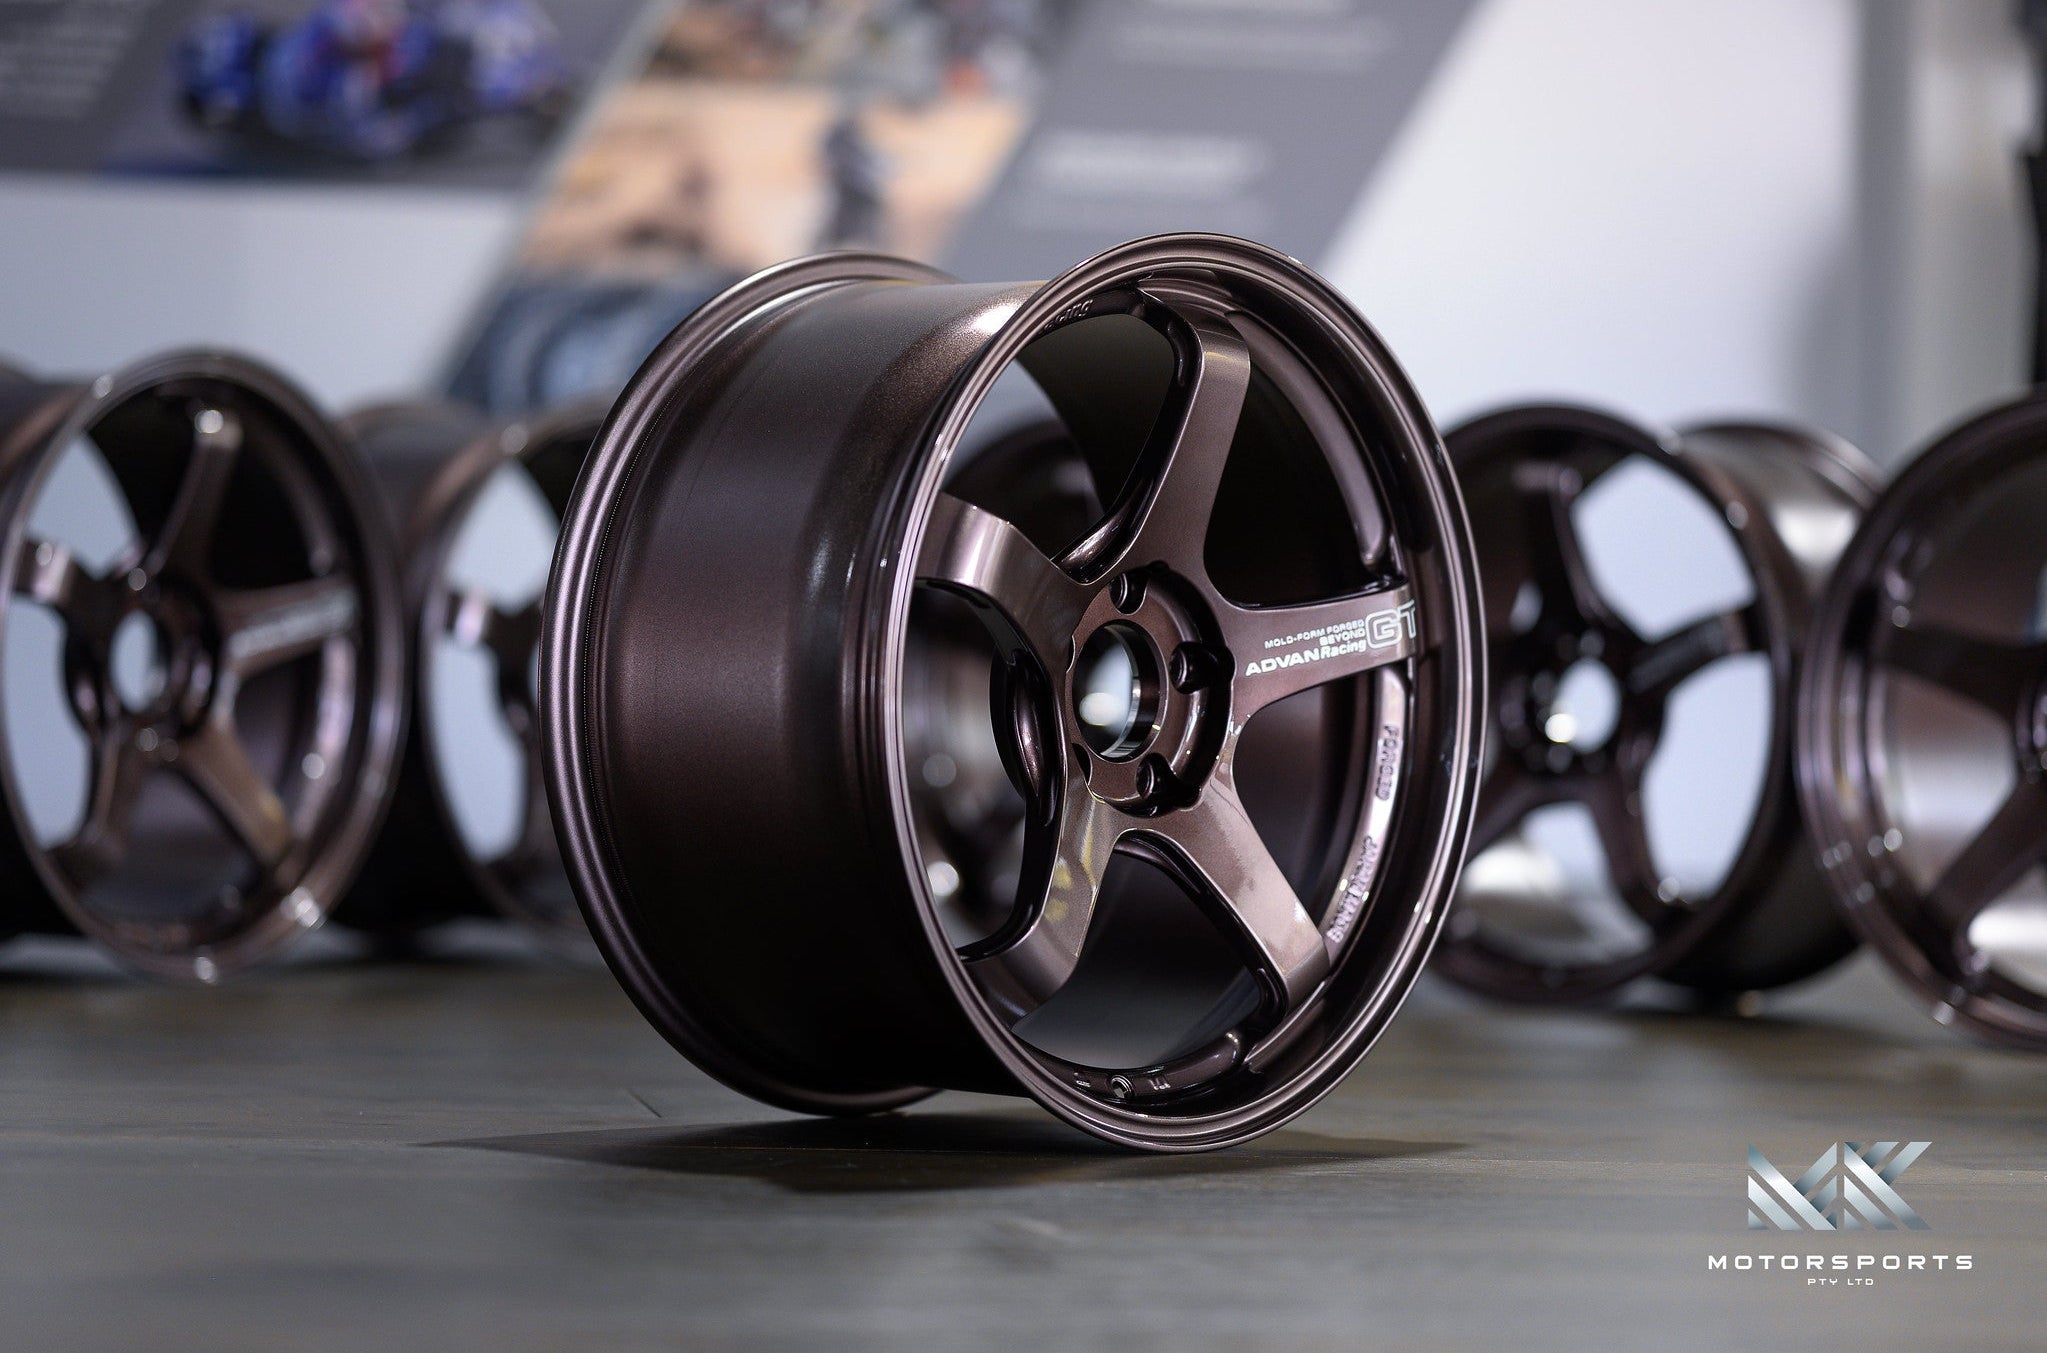 Advan GT Beyond - Premium Wheels from Advan Racing - From just $4090.00! Shop now at MK MOTORSPORTS